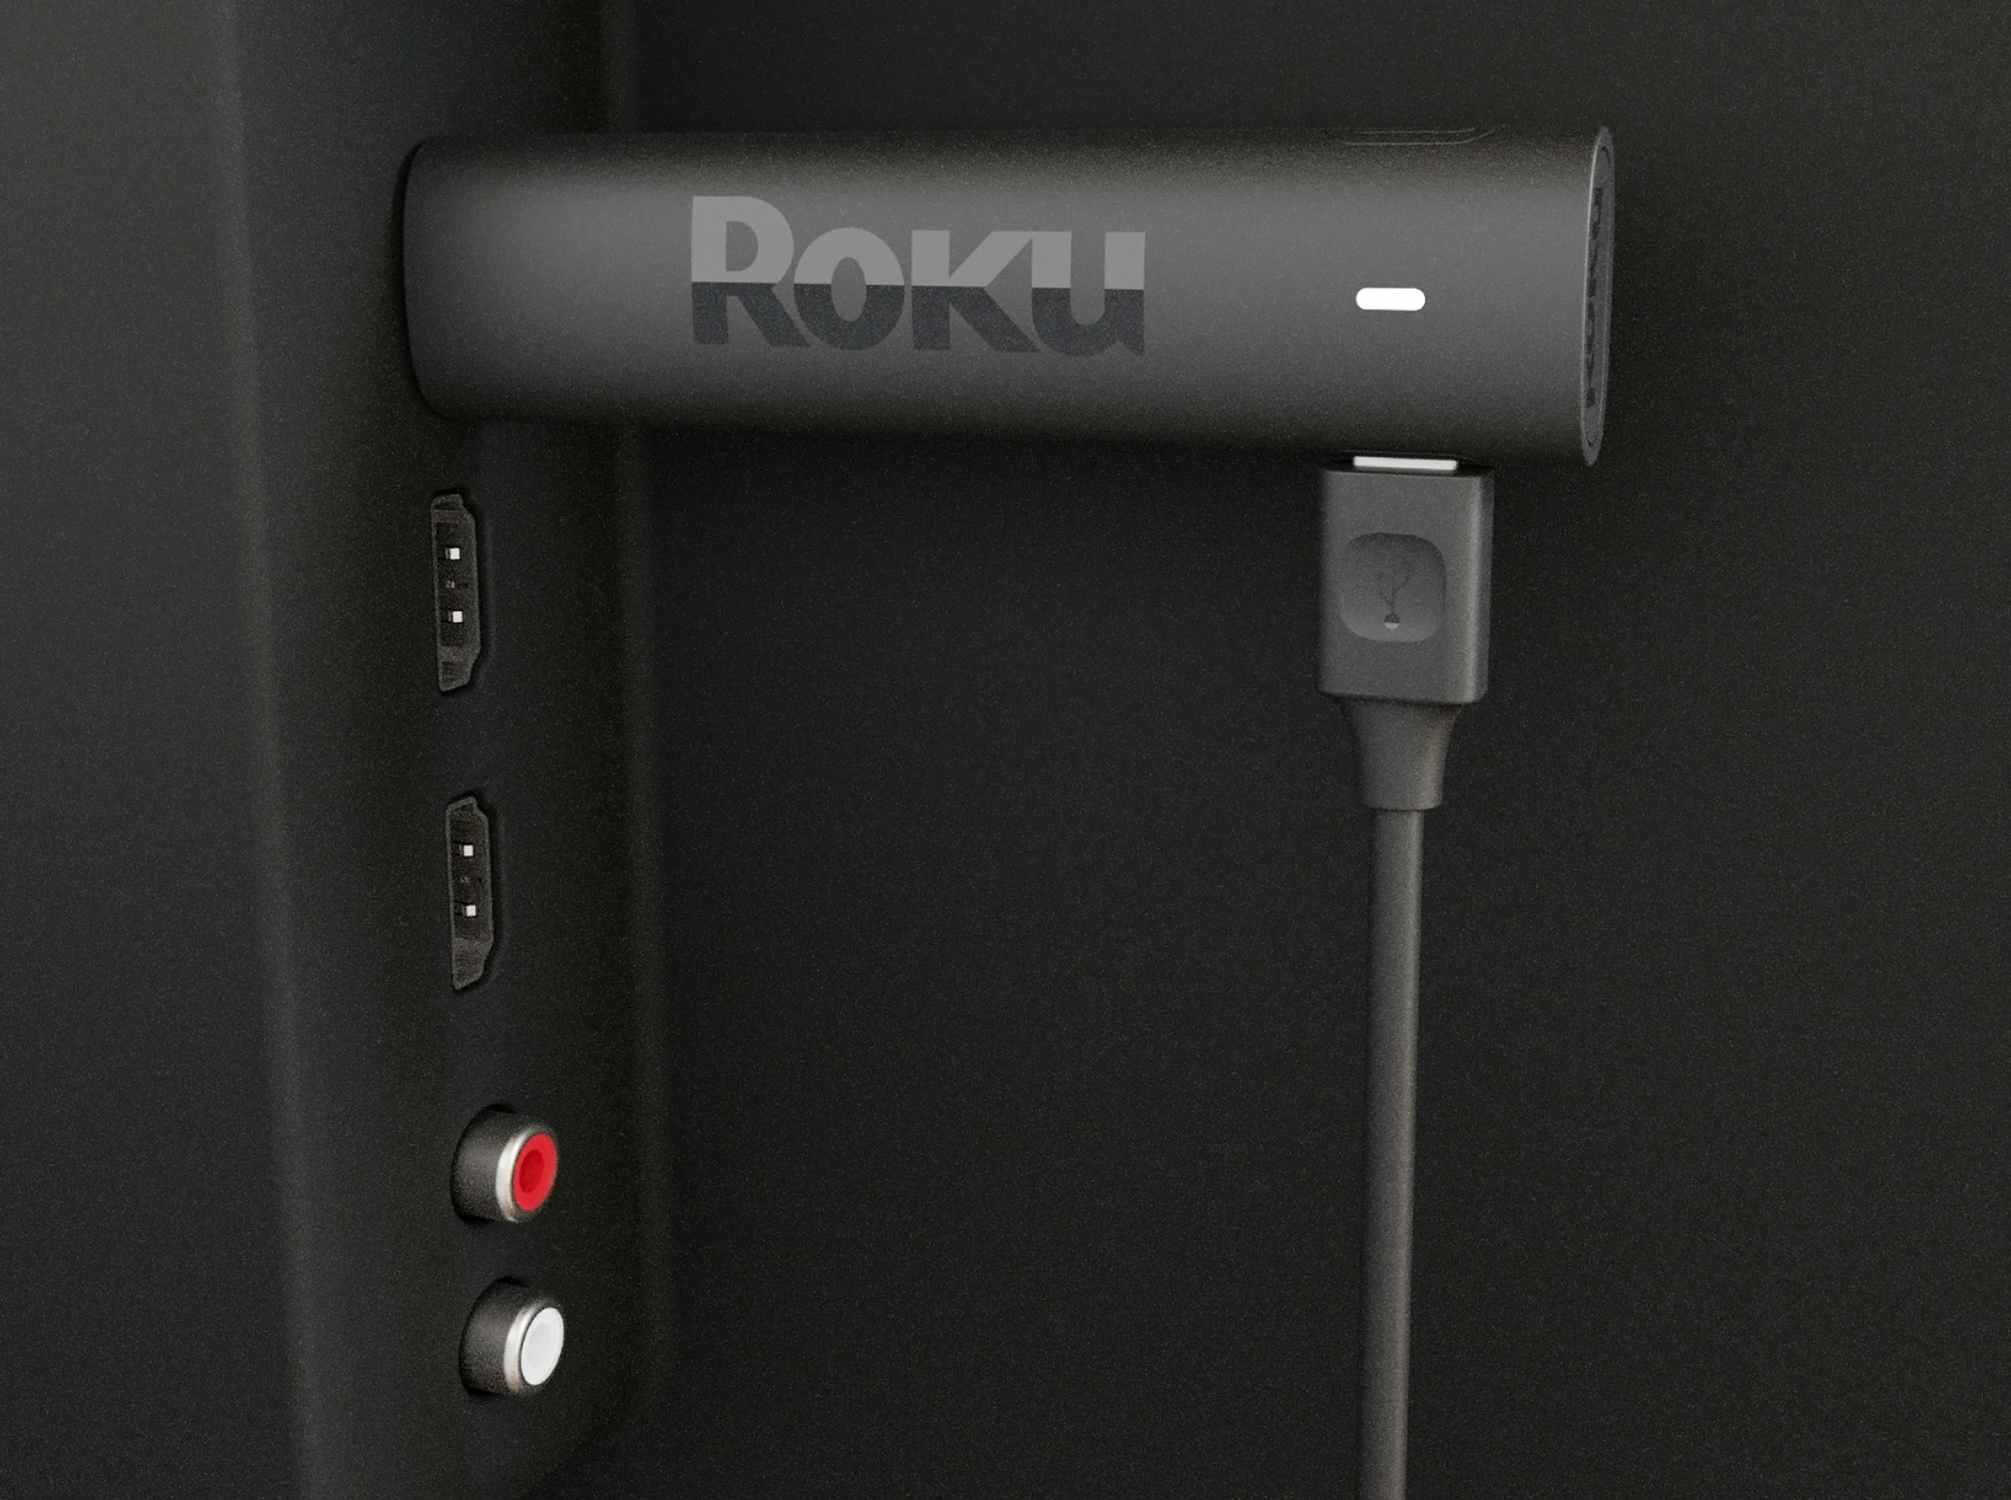 Roku streaming stick plugged into back of TV